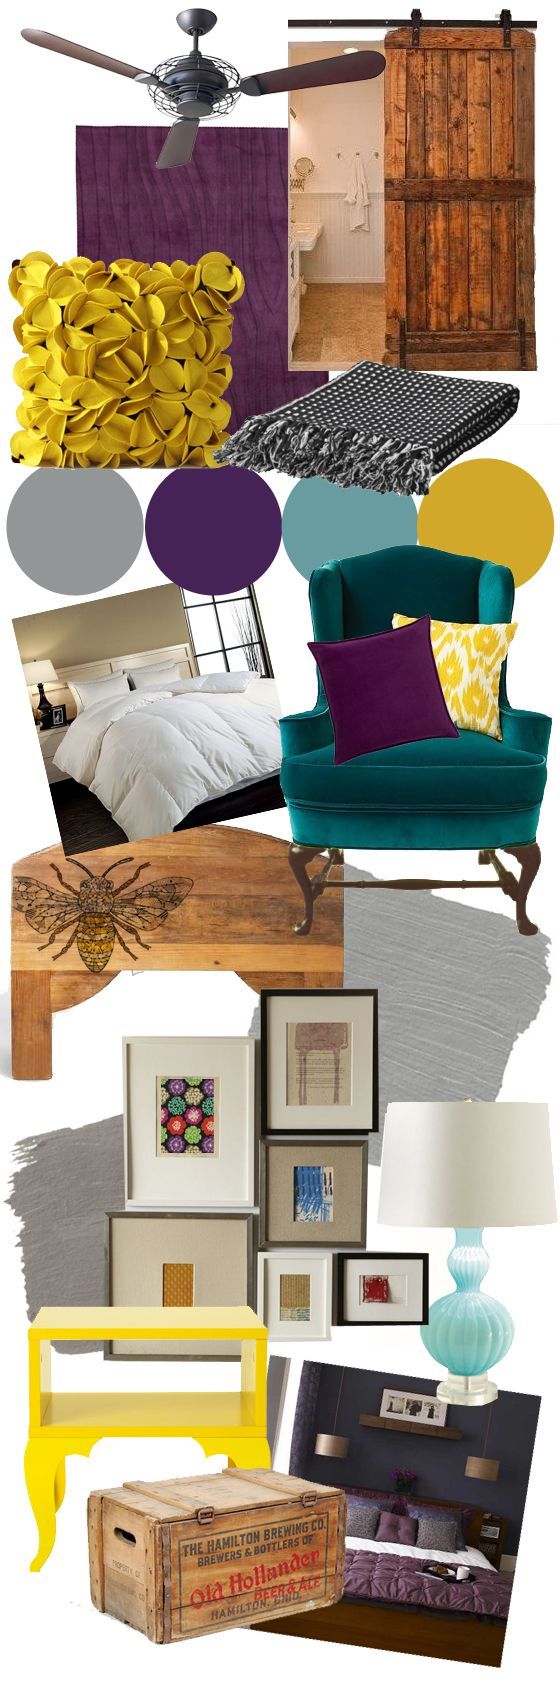 similar colors- mood board… But instead of purple, maybe navy blue. Like the bottom bedroom picture.